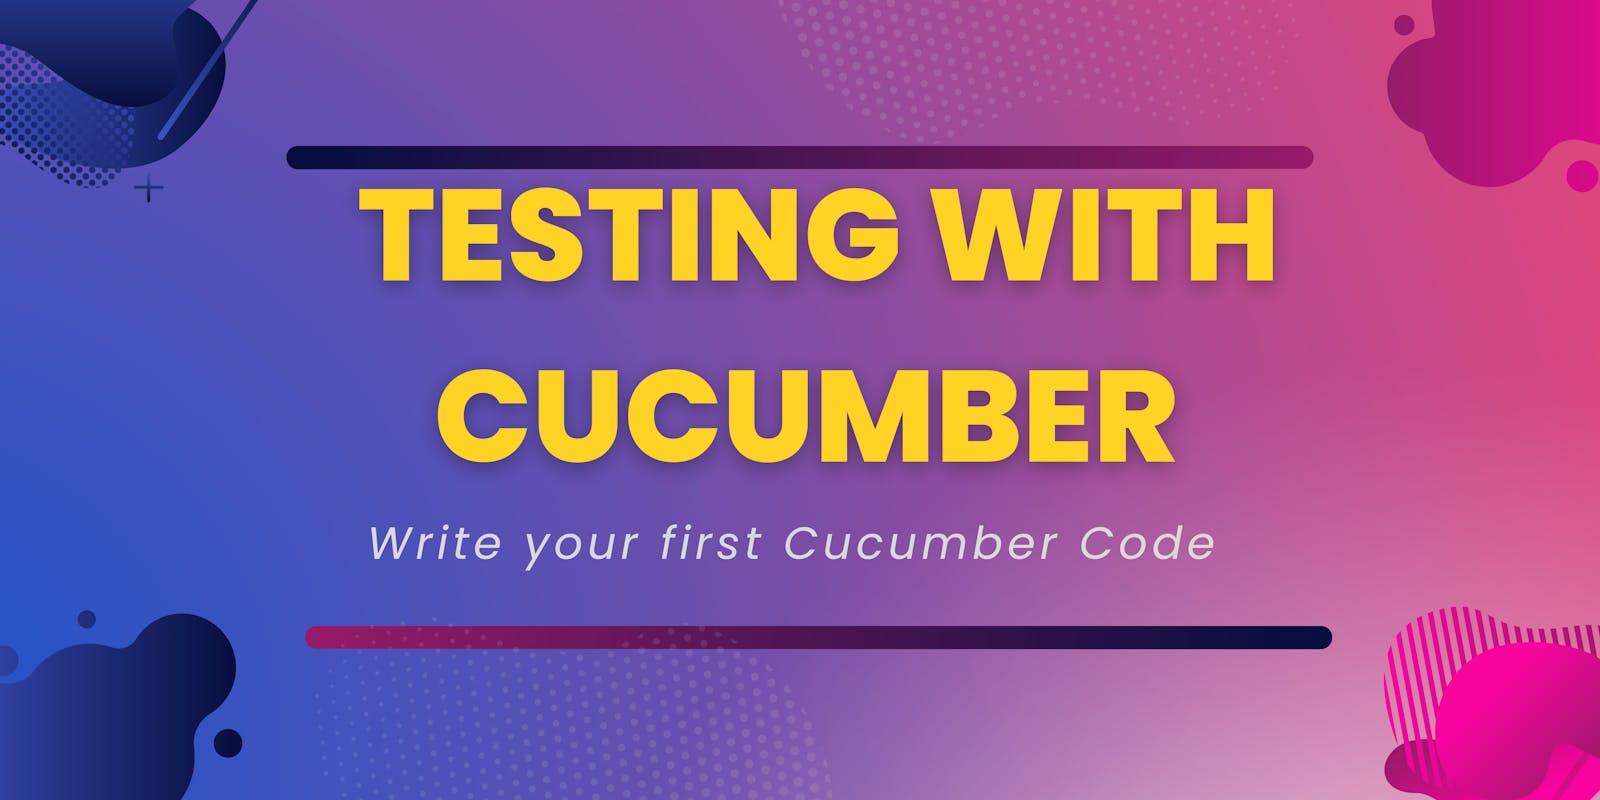 Write your first Cucumber Code